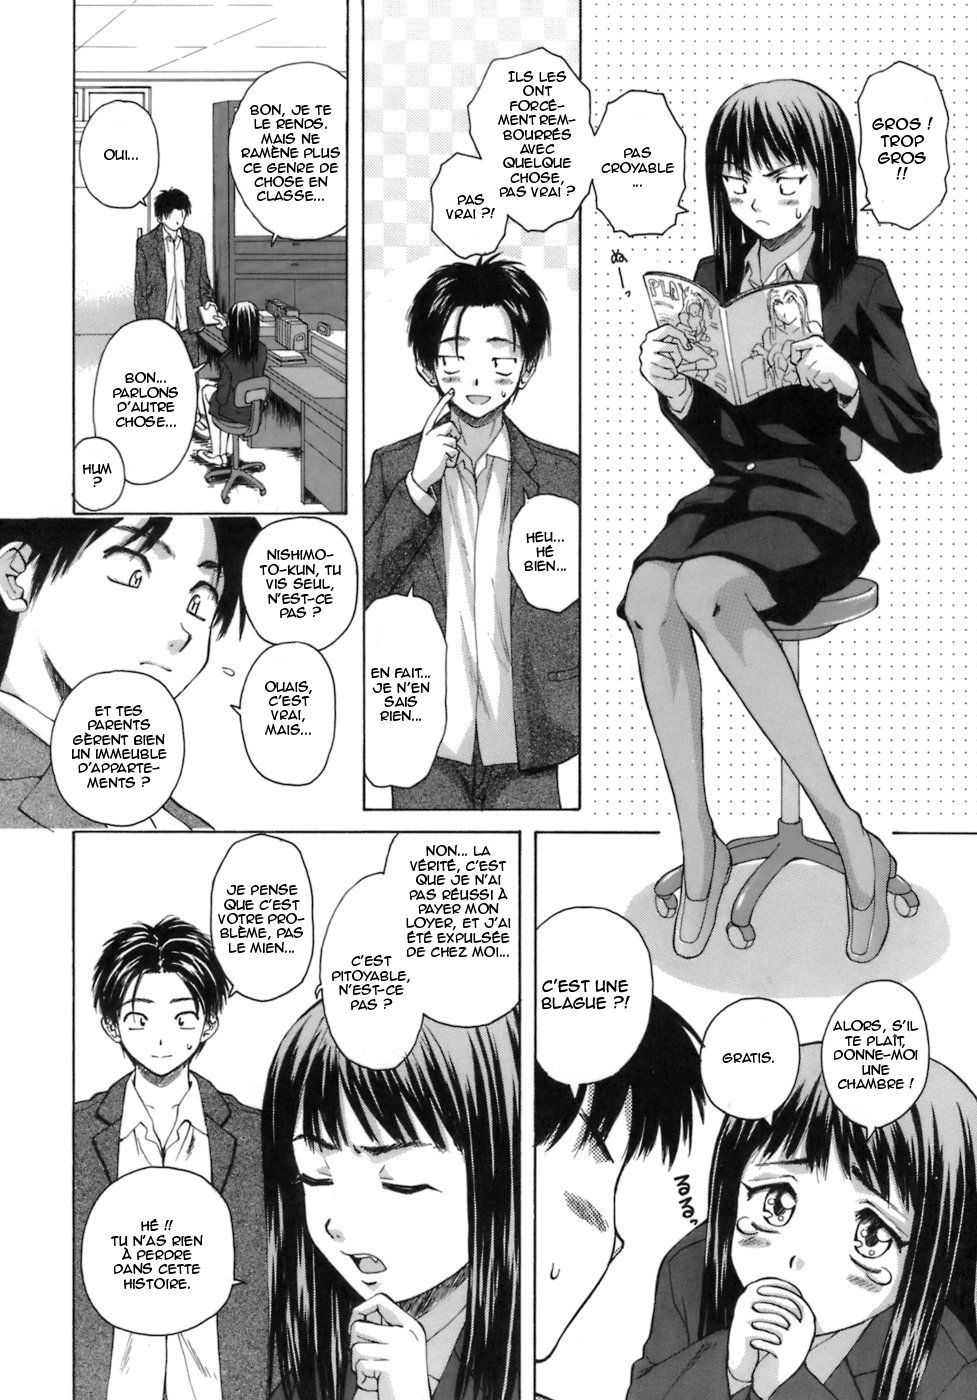 [Fuuga] Kyoushi to Seito to - Teacher and Student | Élève et Professeur Ch. 1 [French] [O-S] [楓牙] 教師と生徒と 第1話 [フランス翻訳]